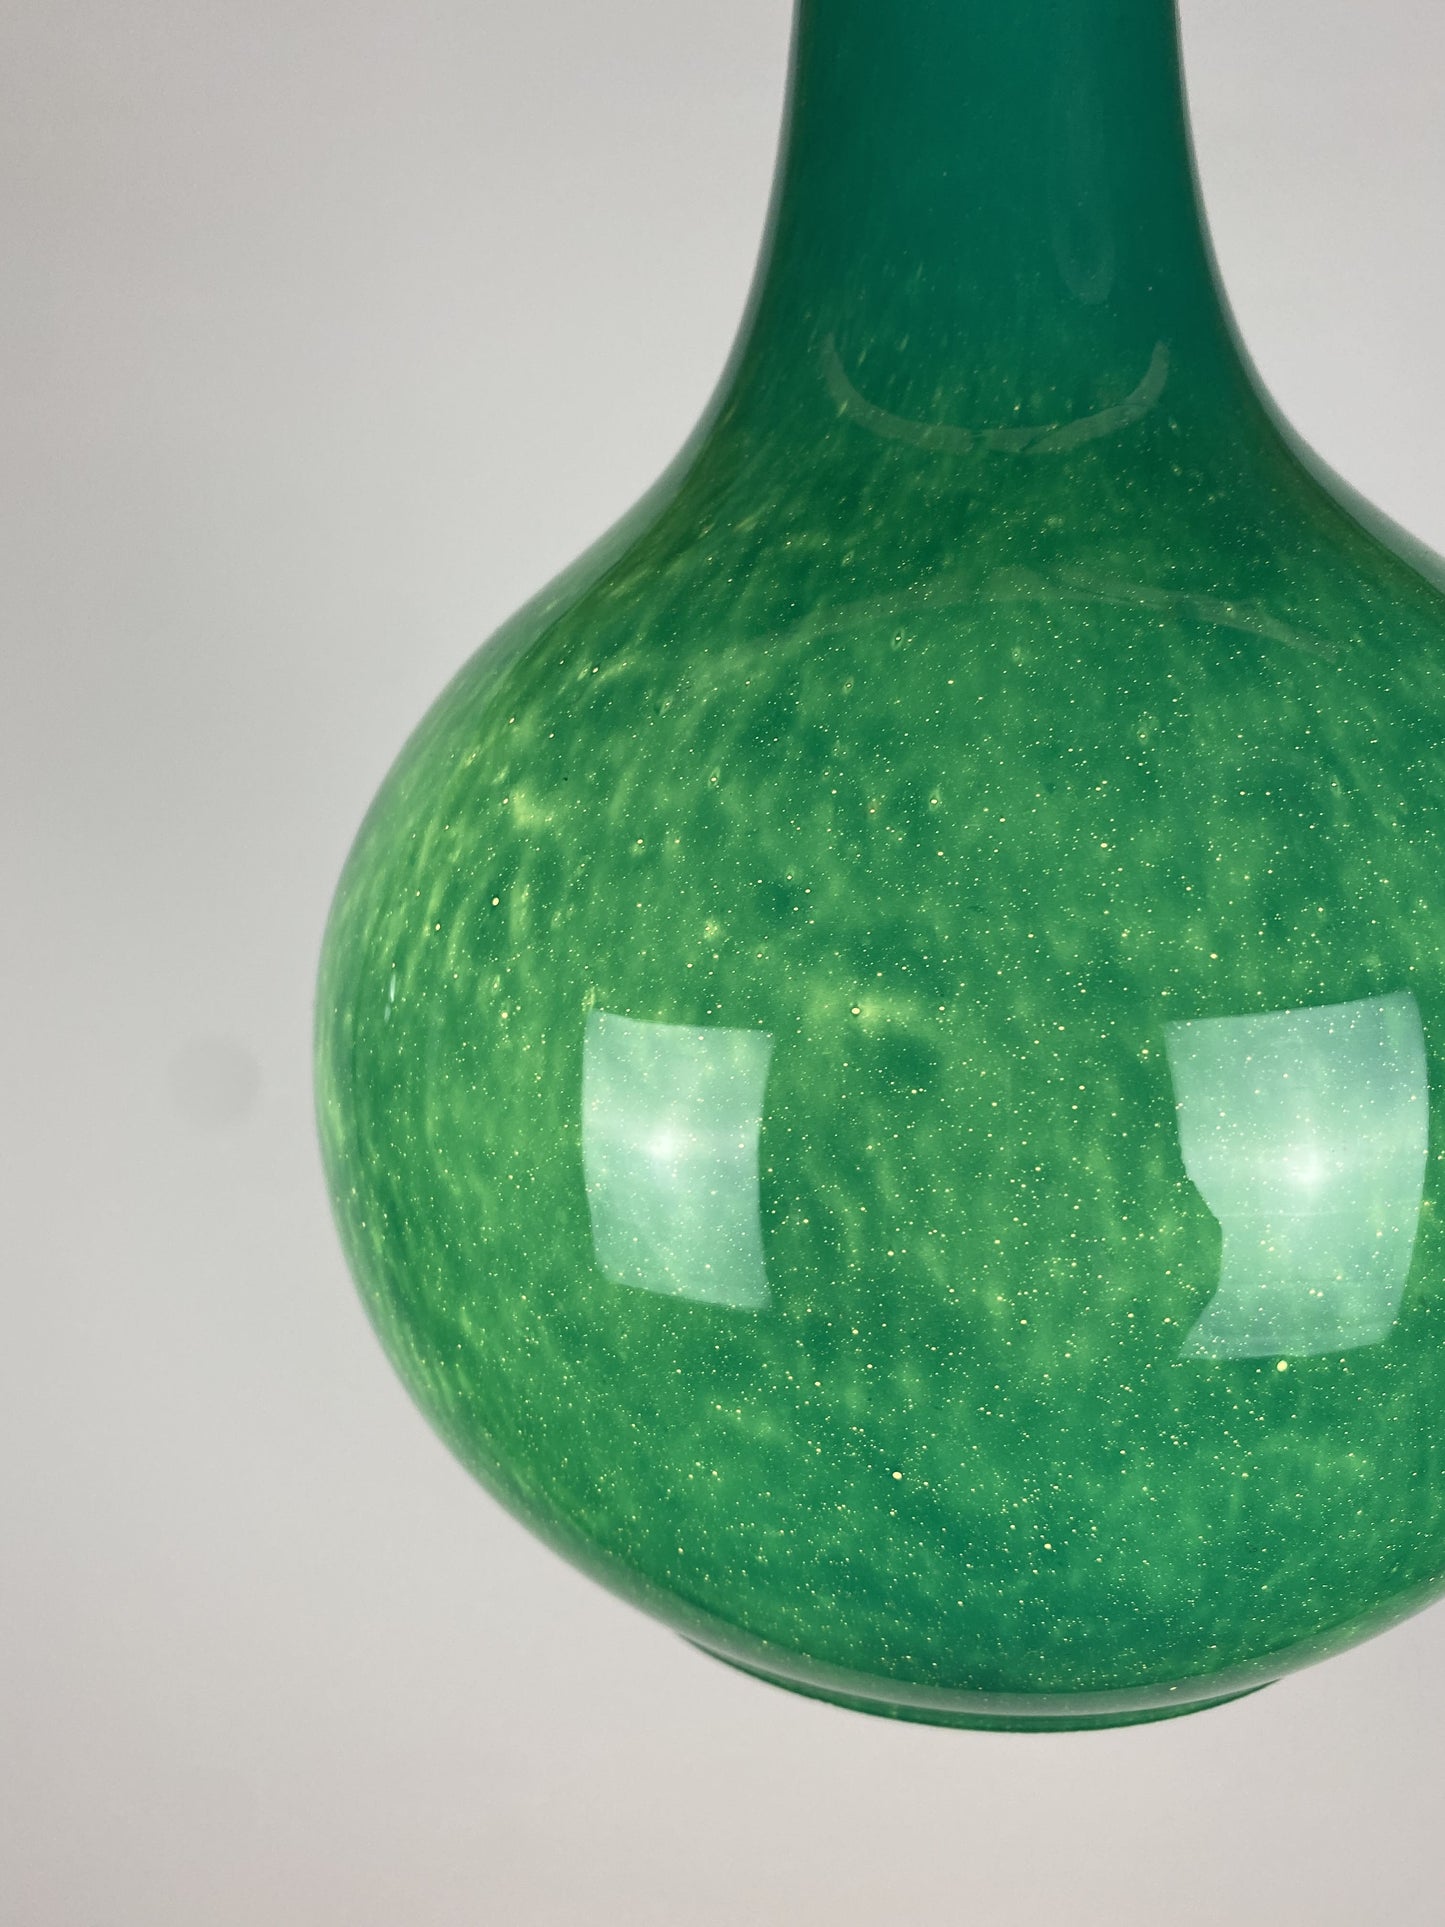 Rare droplet shaped Galaxy green glass pendant light by Peill and Putzler